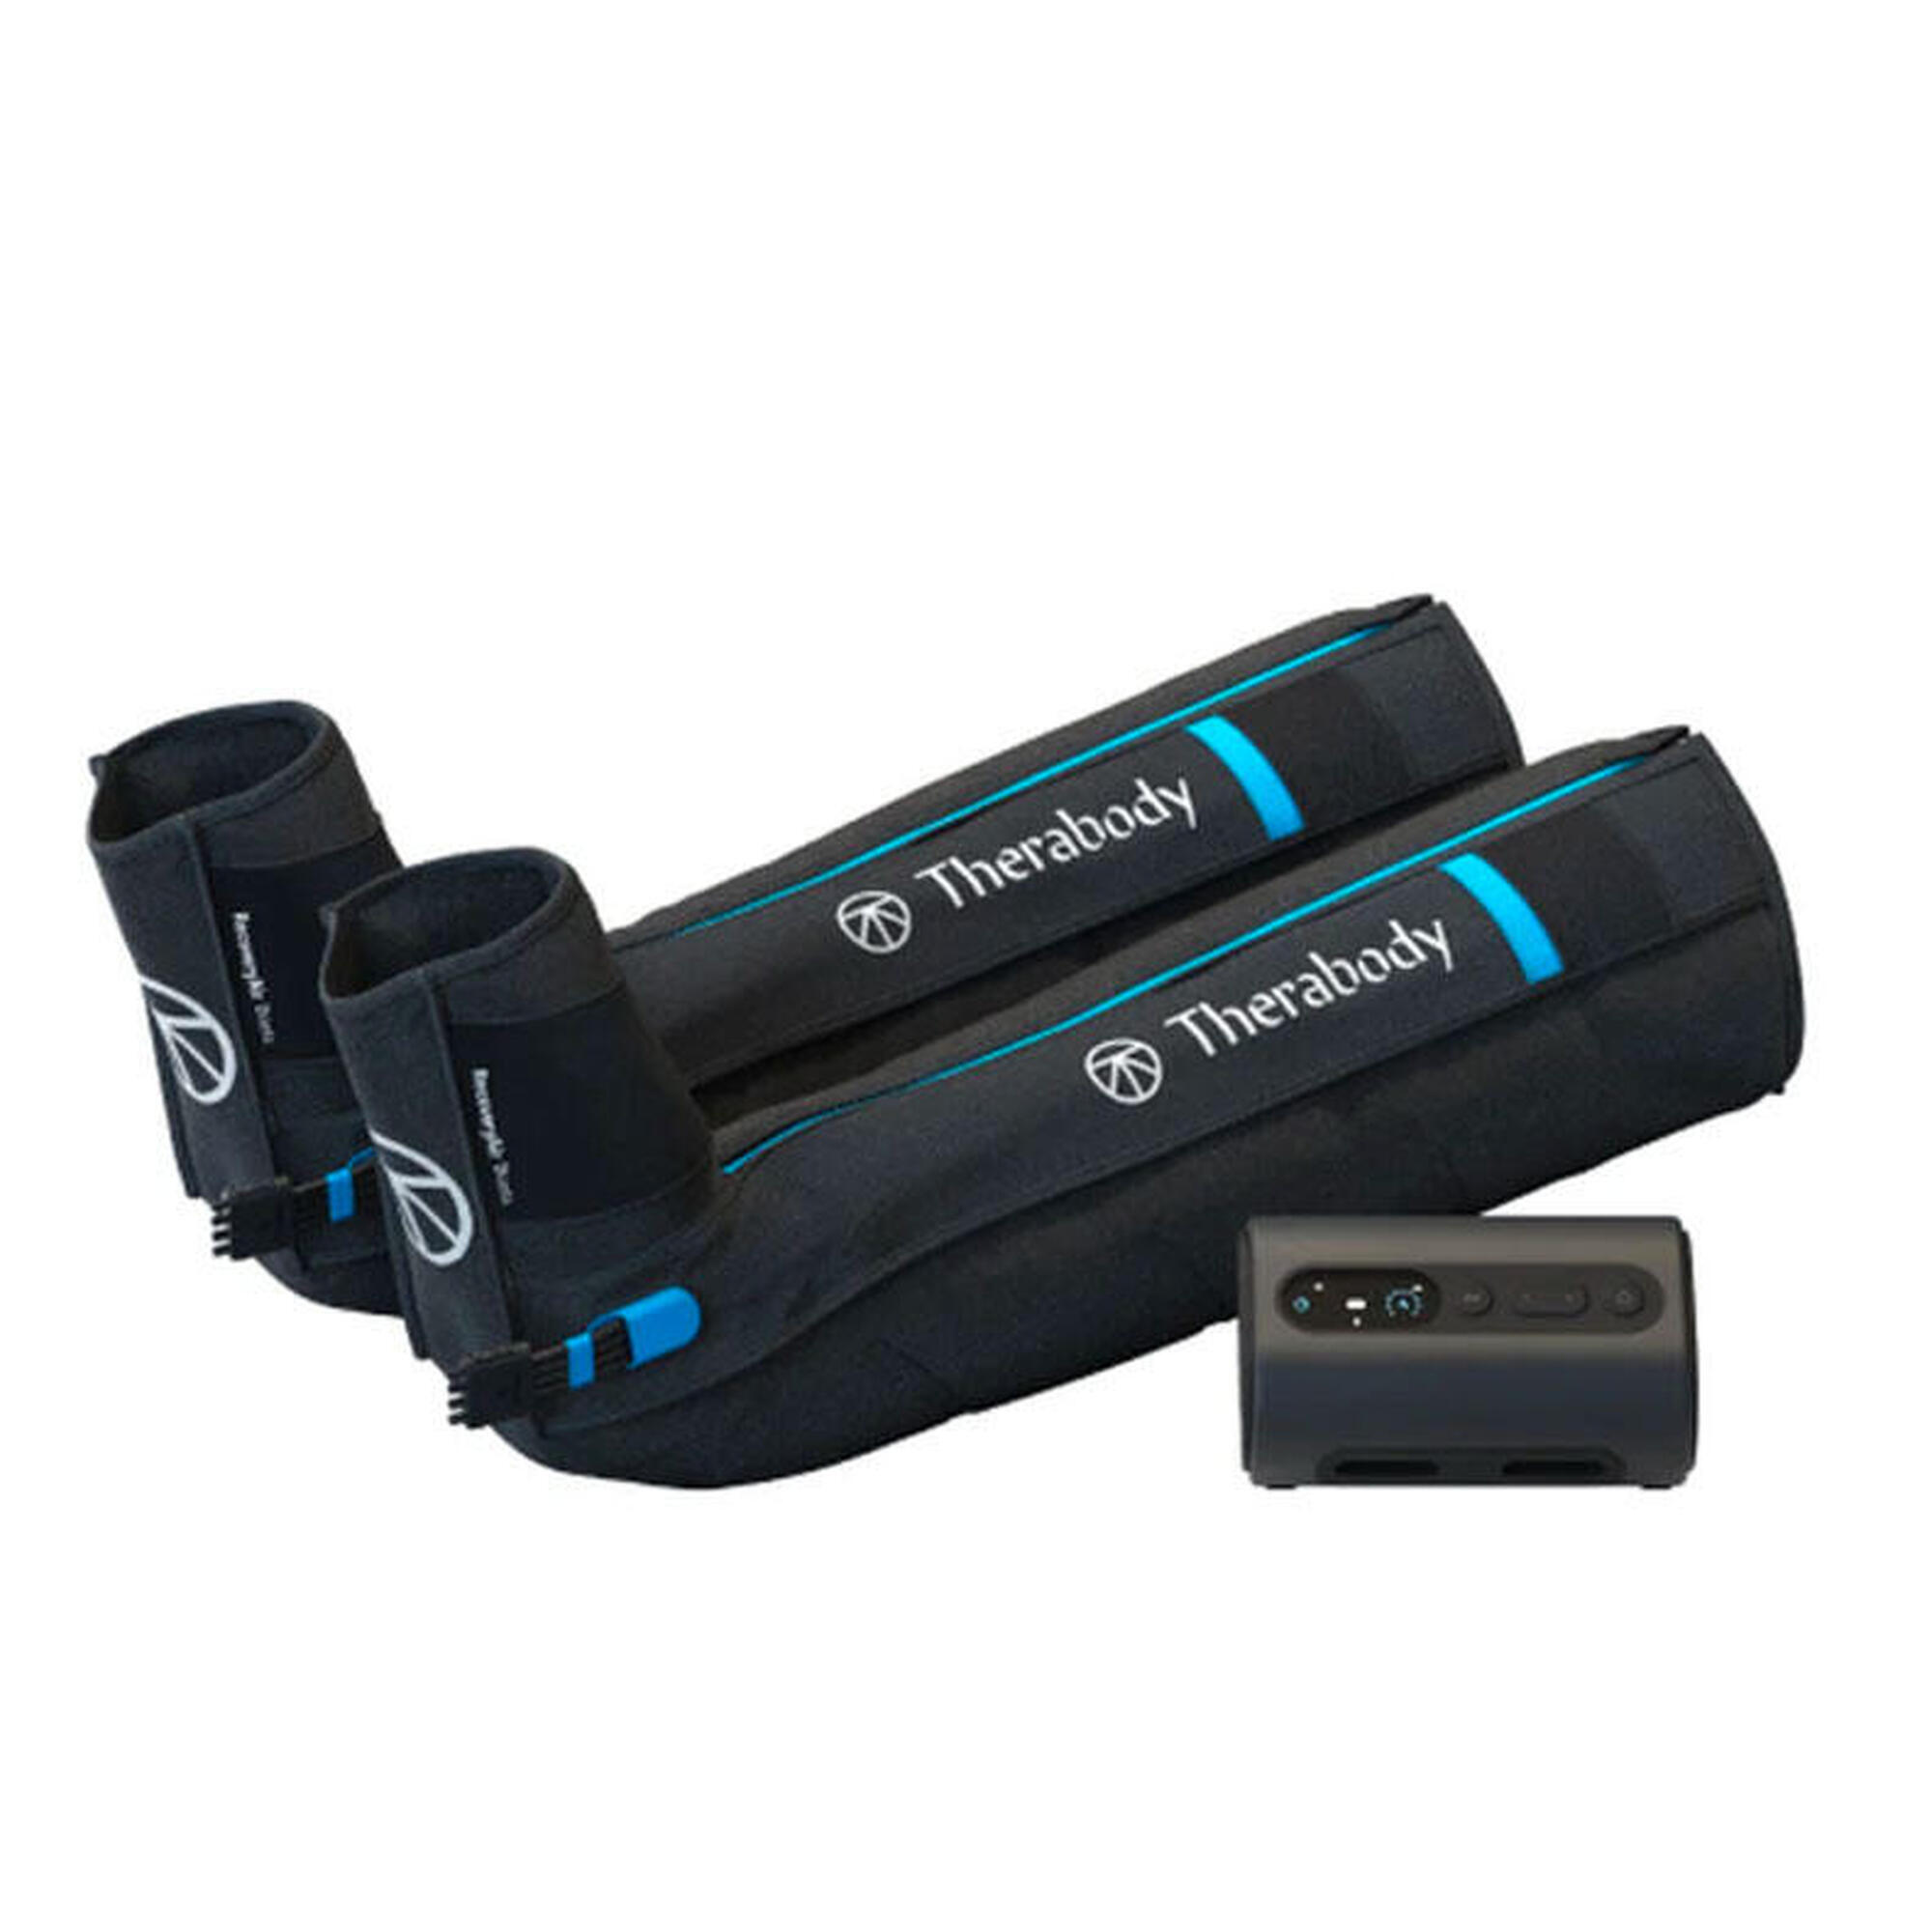 Wireless Boots a compressione Therabody RecoveryAir Prime Compression